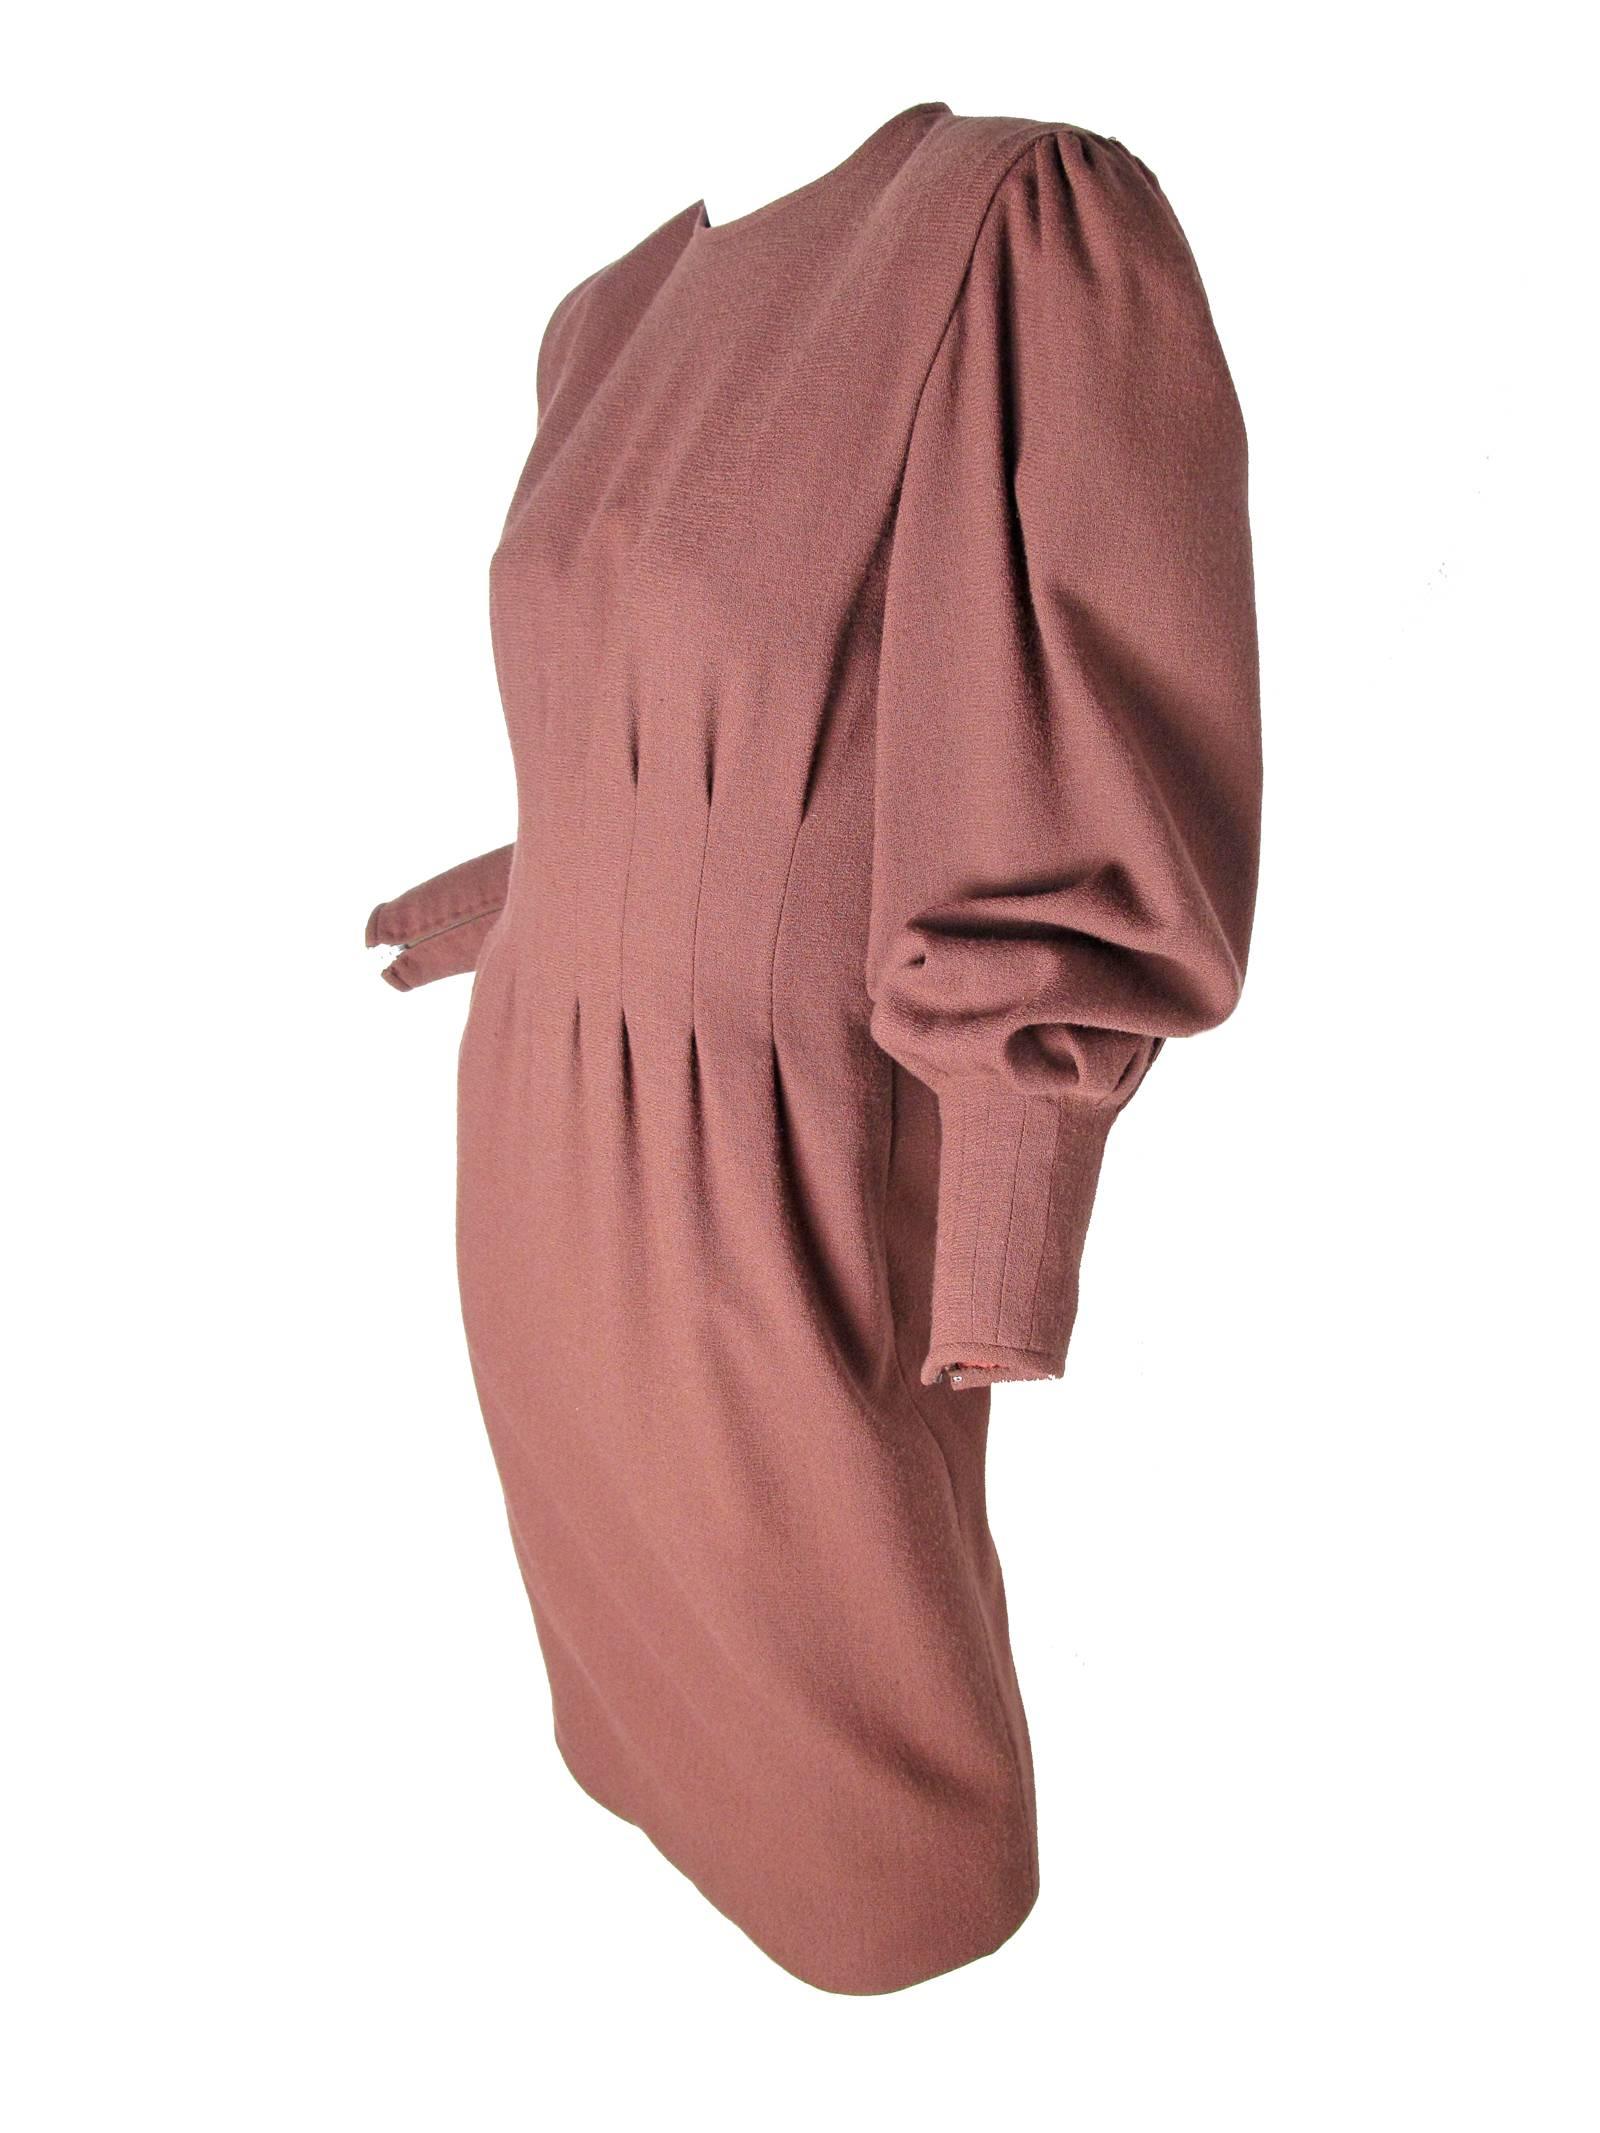 Michael Novarse brown wool dress with pleating at waist and cuffs. 
Condition: Very good, some all over wear.  Size 8

36